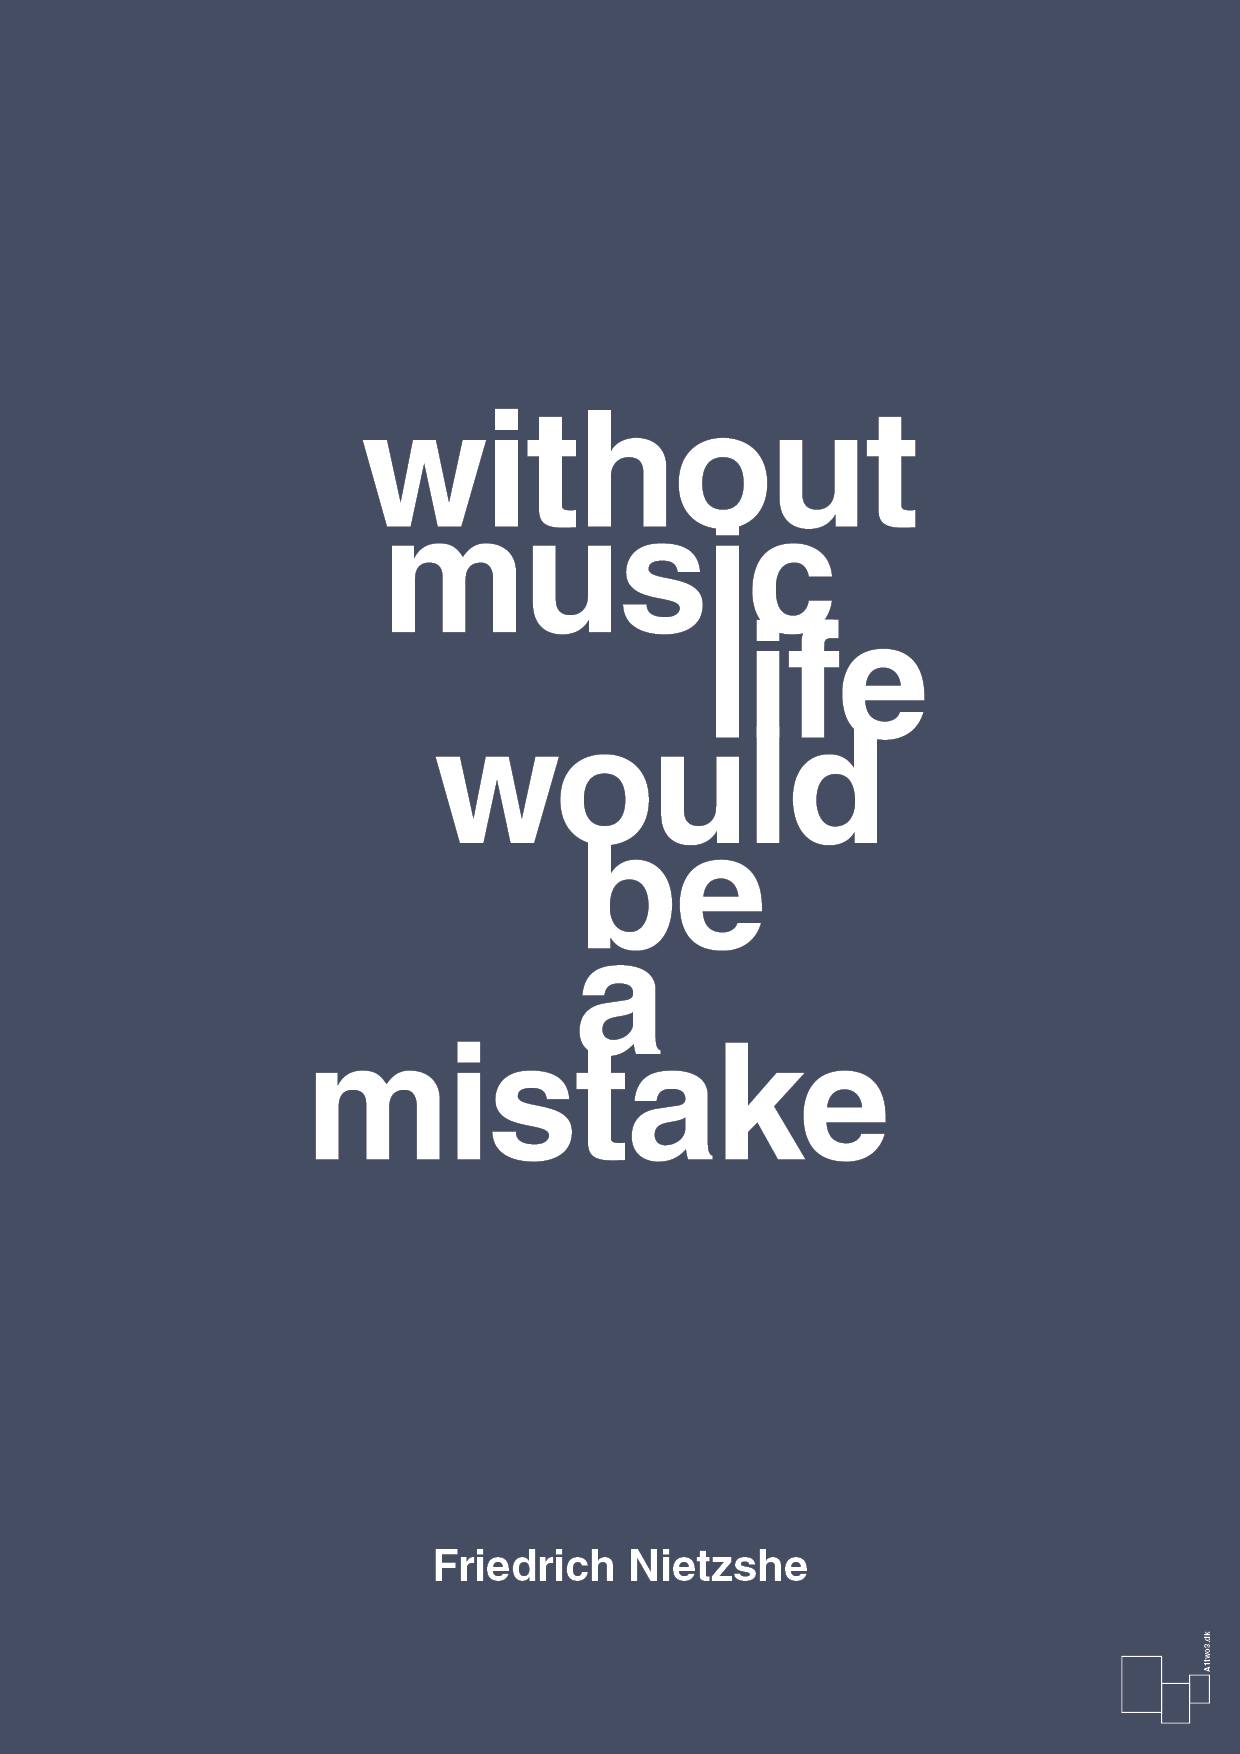 without music life would be a mistake - Plakat med Citater i Petrol